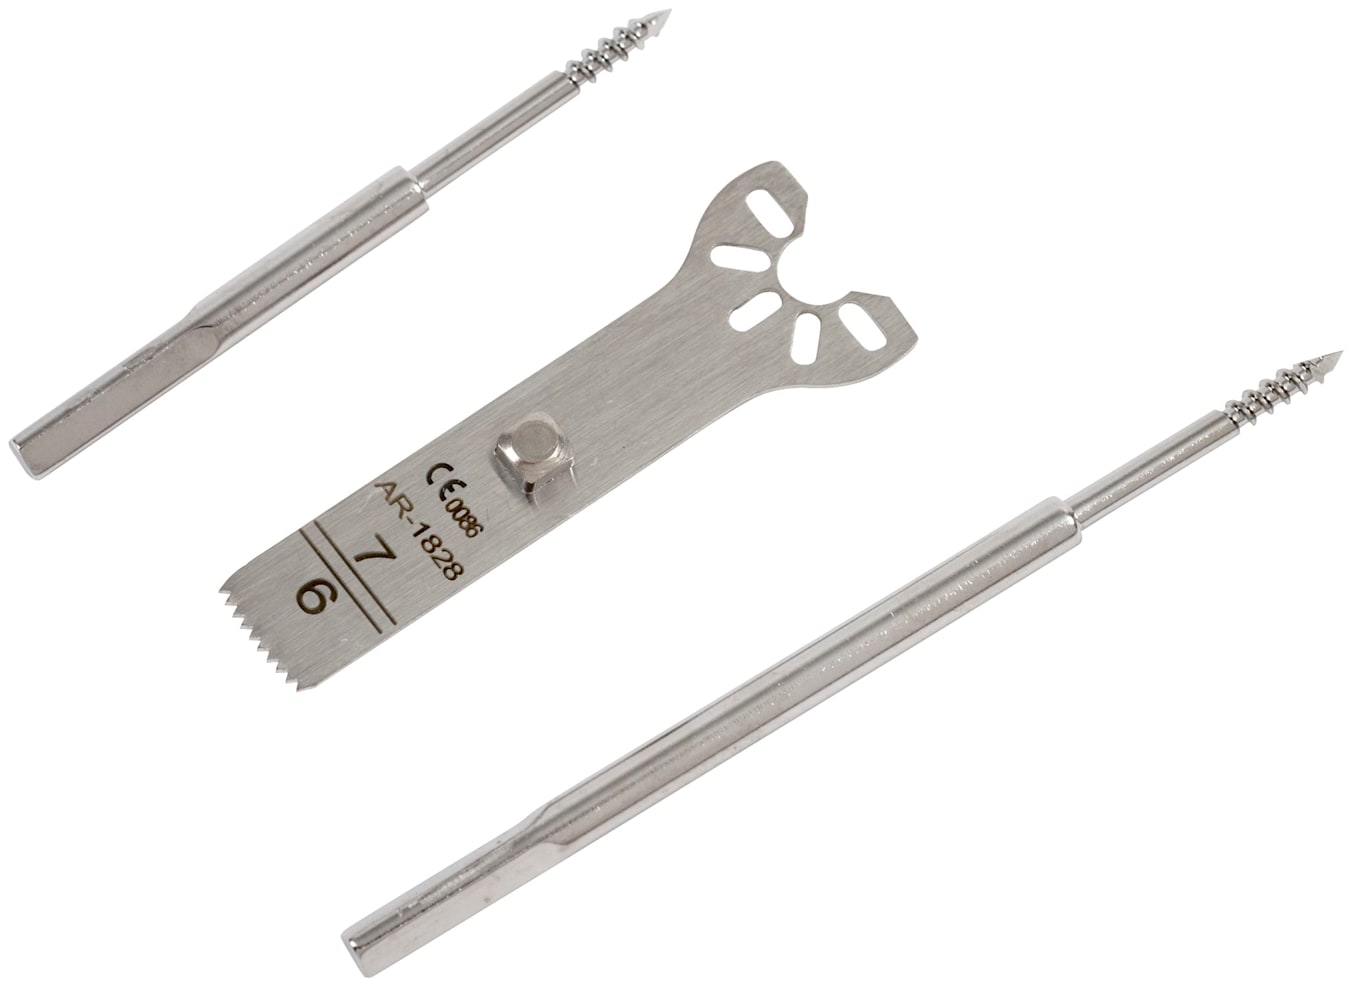 Graft Harvesting Kit with Stryker (Command 2 System) Style Oscillating/Sagittal Saw Blade w/7 mm Depth Stop and 2 ea. Threaded Fixation Pins, Short and Long